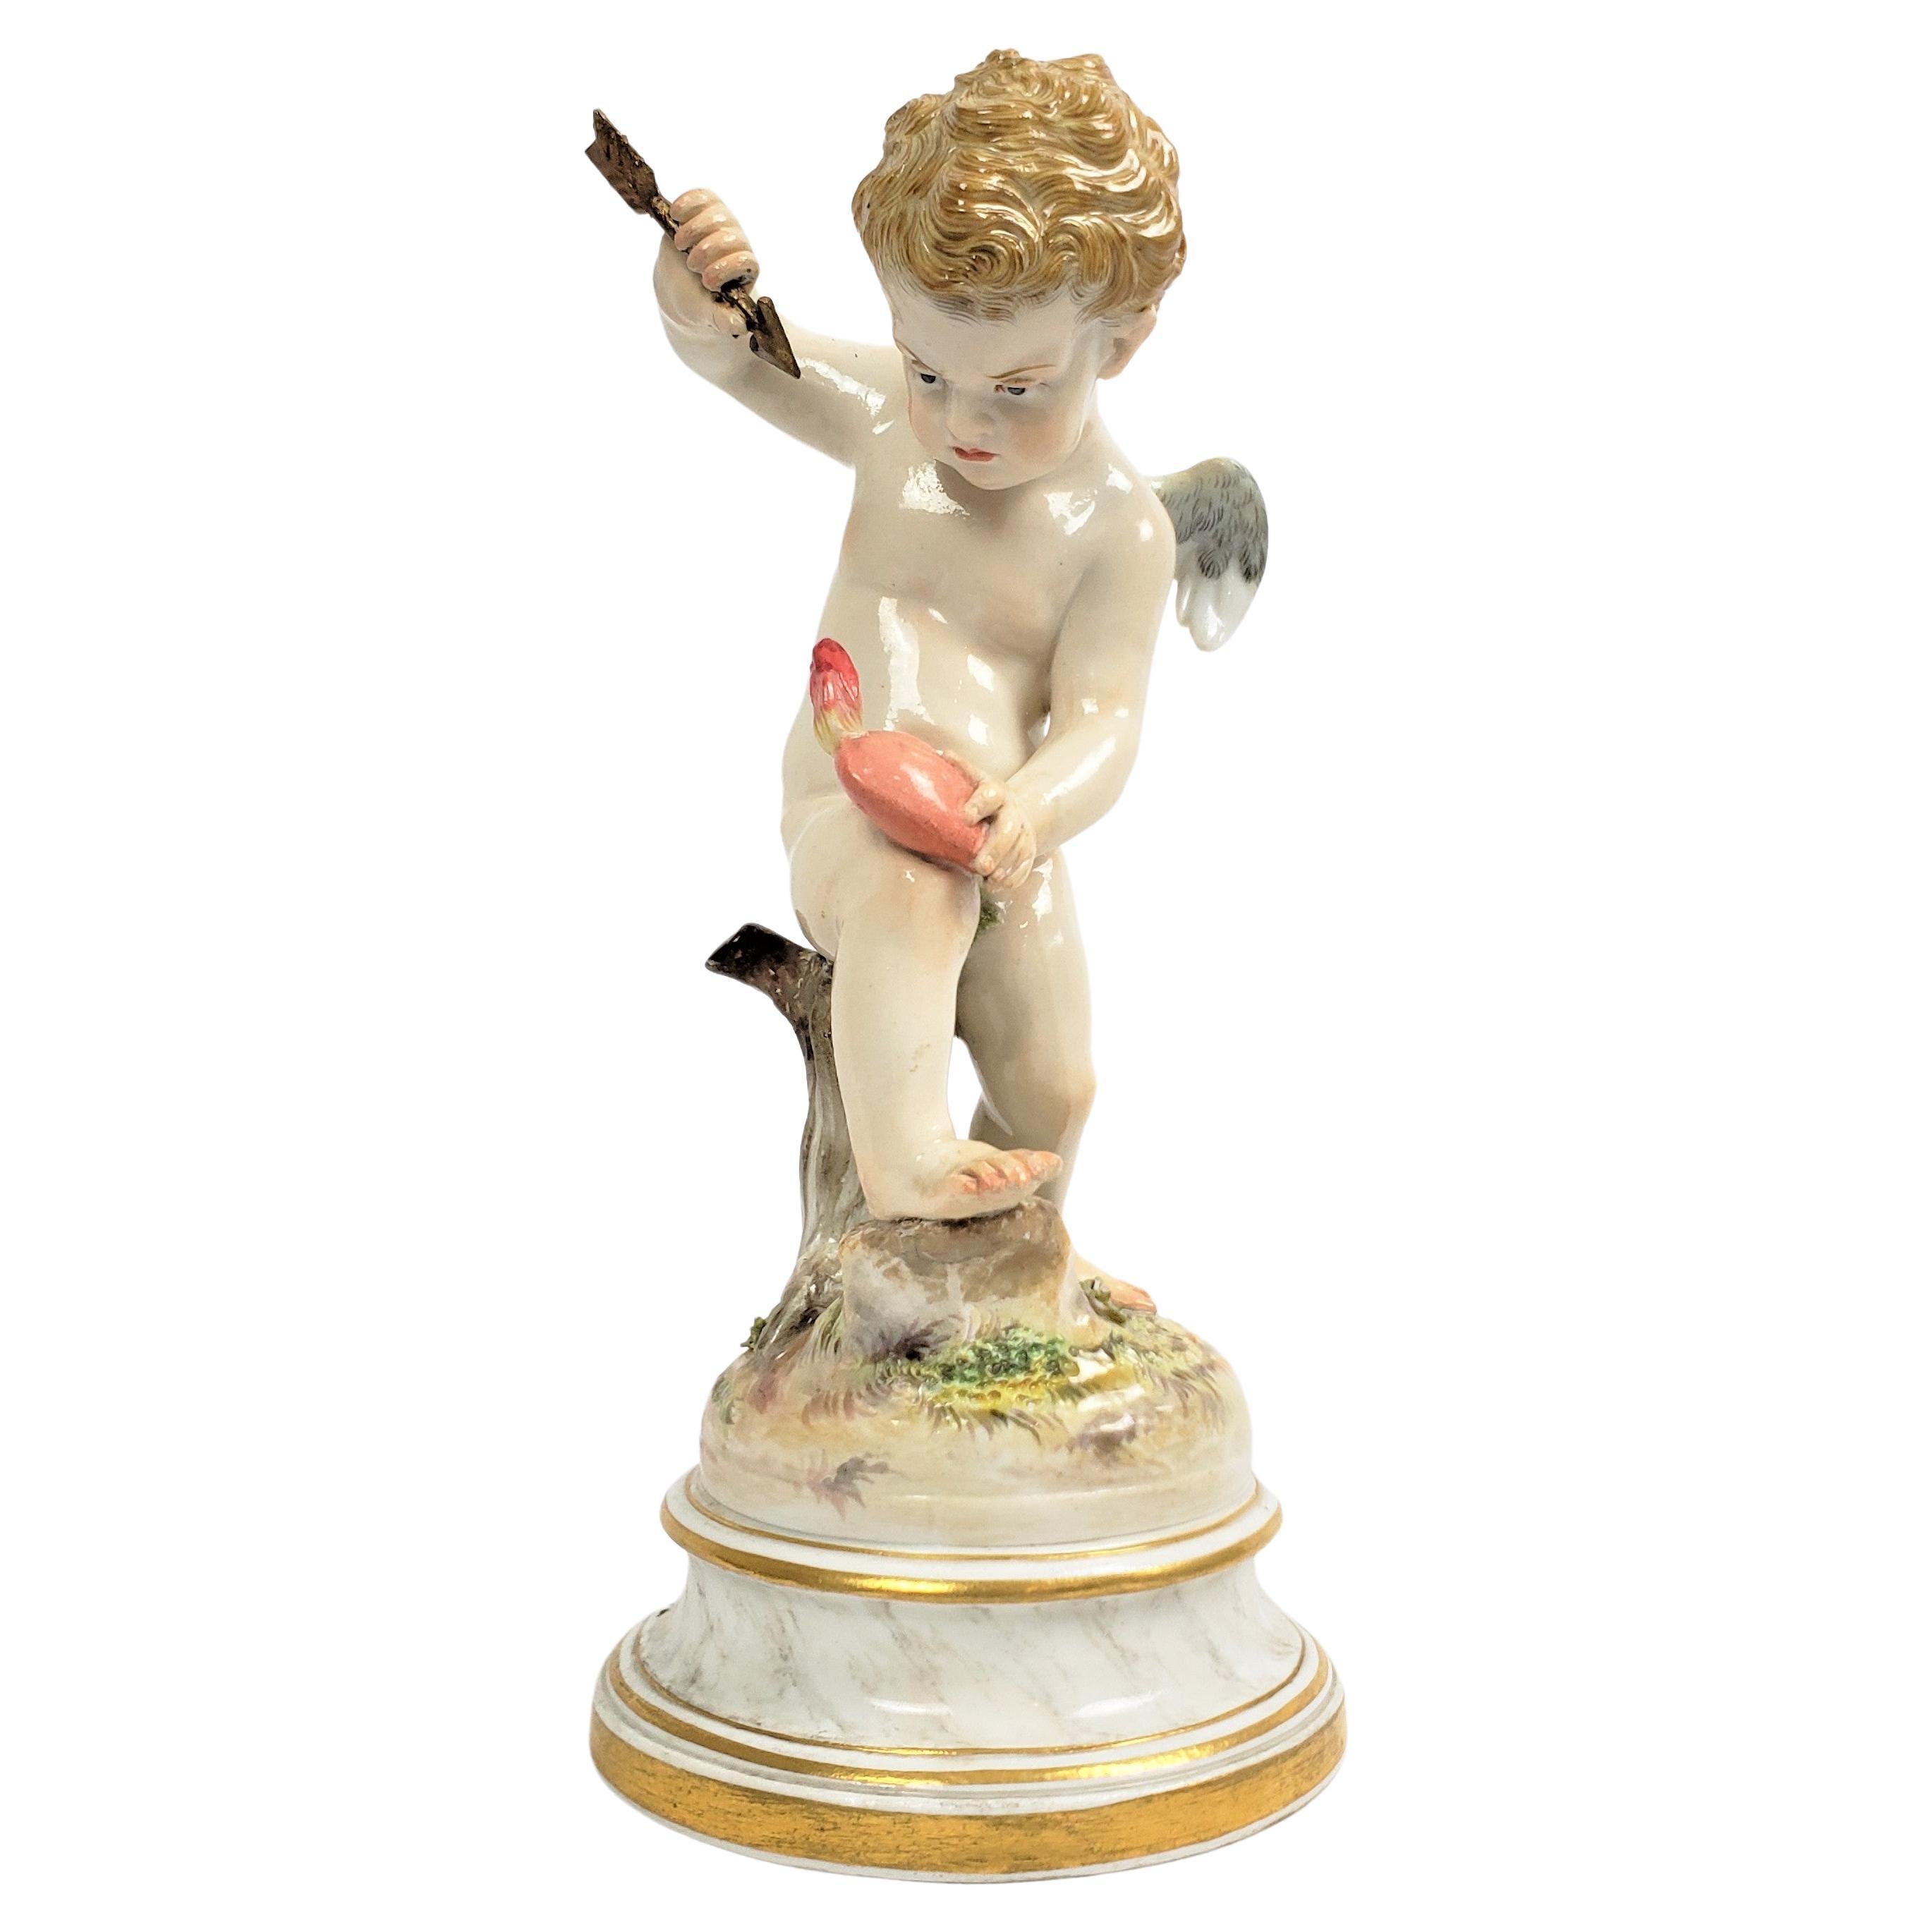 Antique Meissen Porcelain Figurine of Cupid Holding an Arrow & Flaming Heart